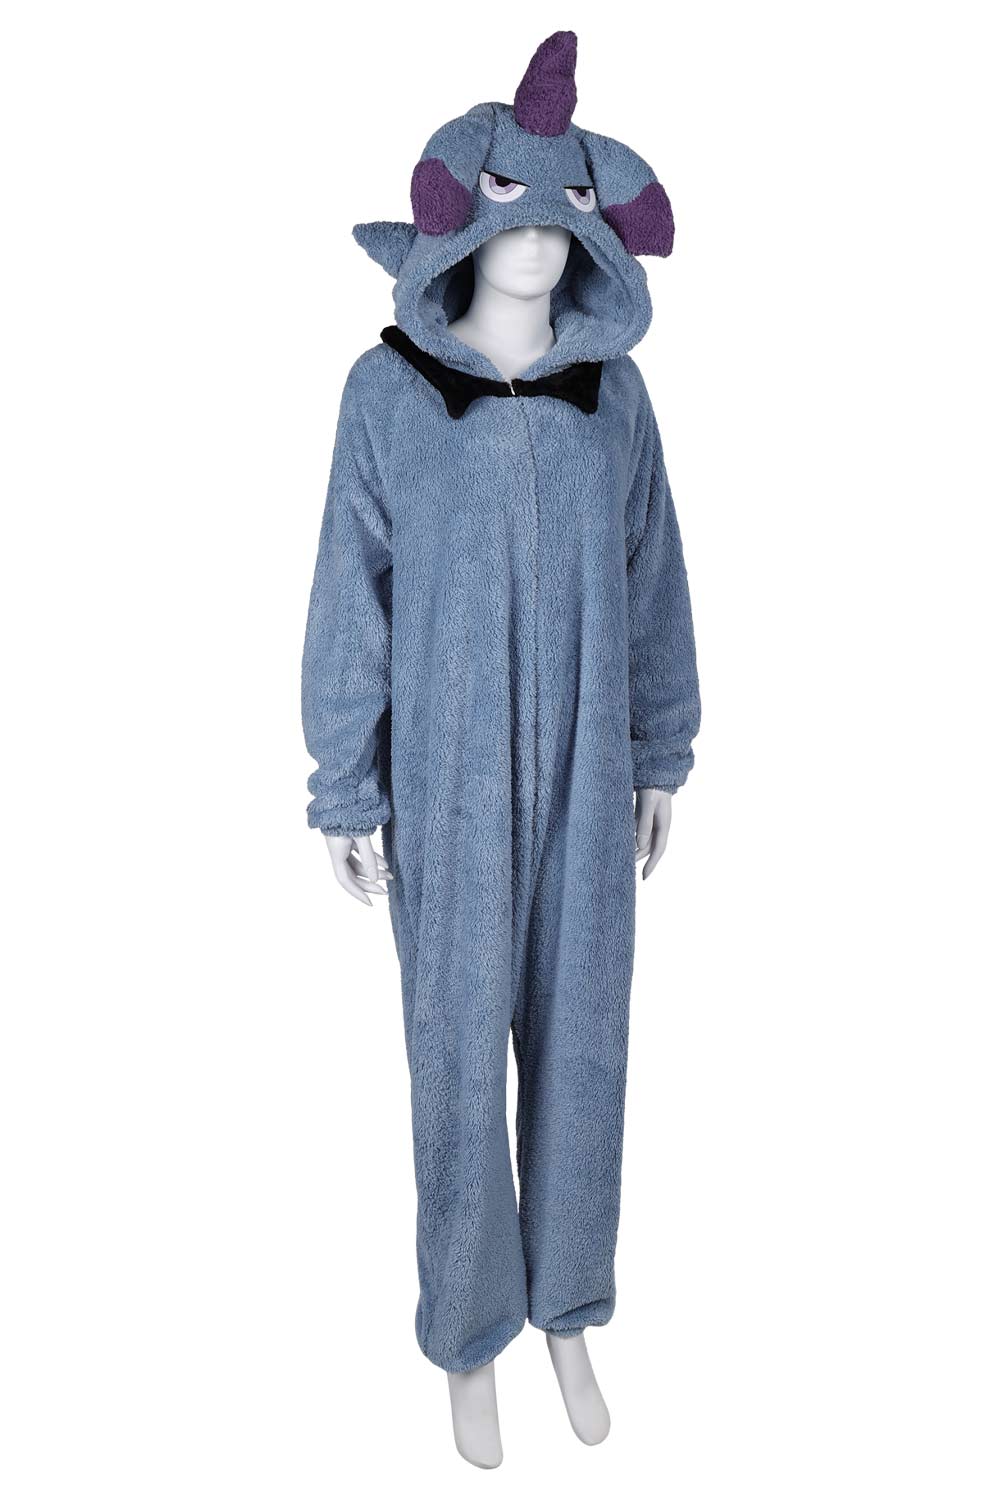 SeeCosplay Game Palworld Depresso Plush One-piece Fuzzy Pajamas Jumpsuit Outfits Halloween Carnival Suit Cosplay Costume